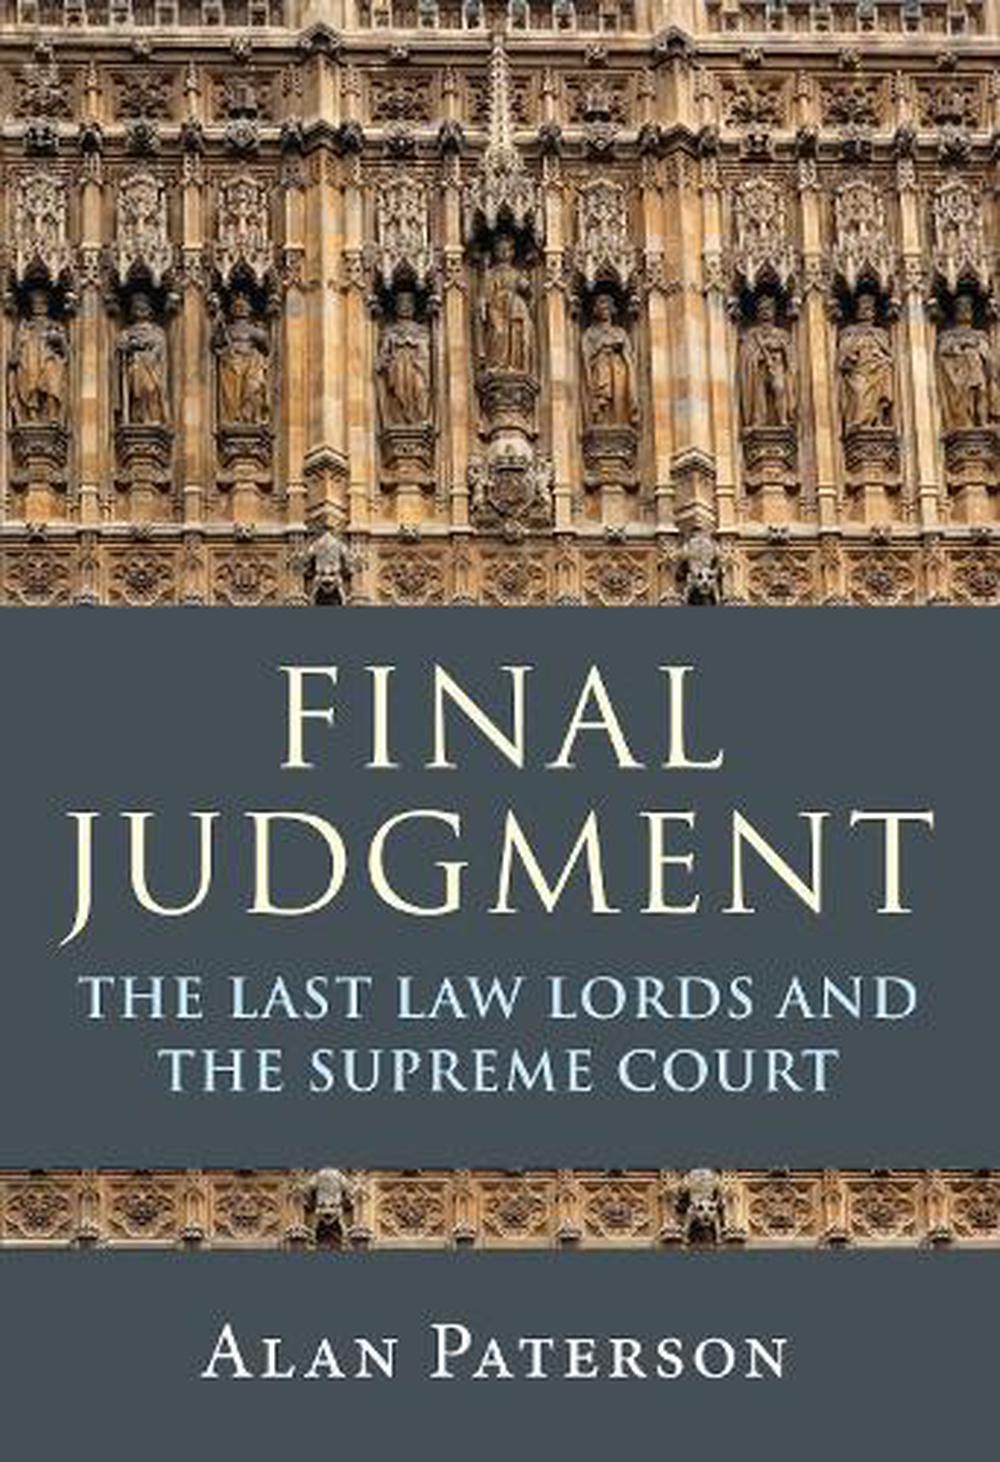 The Final Judgment by Richard North Patterson